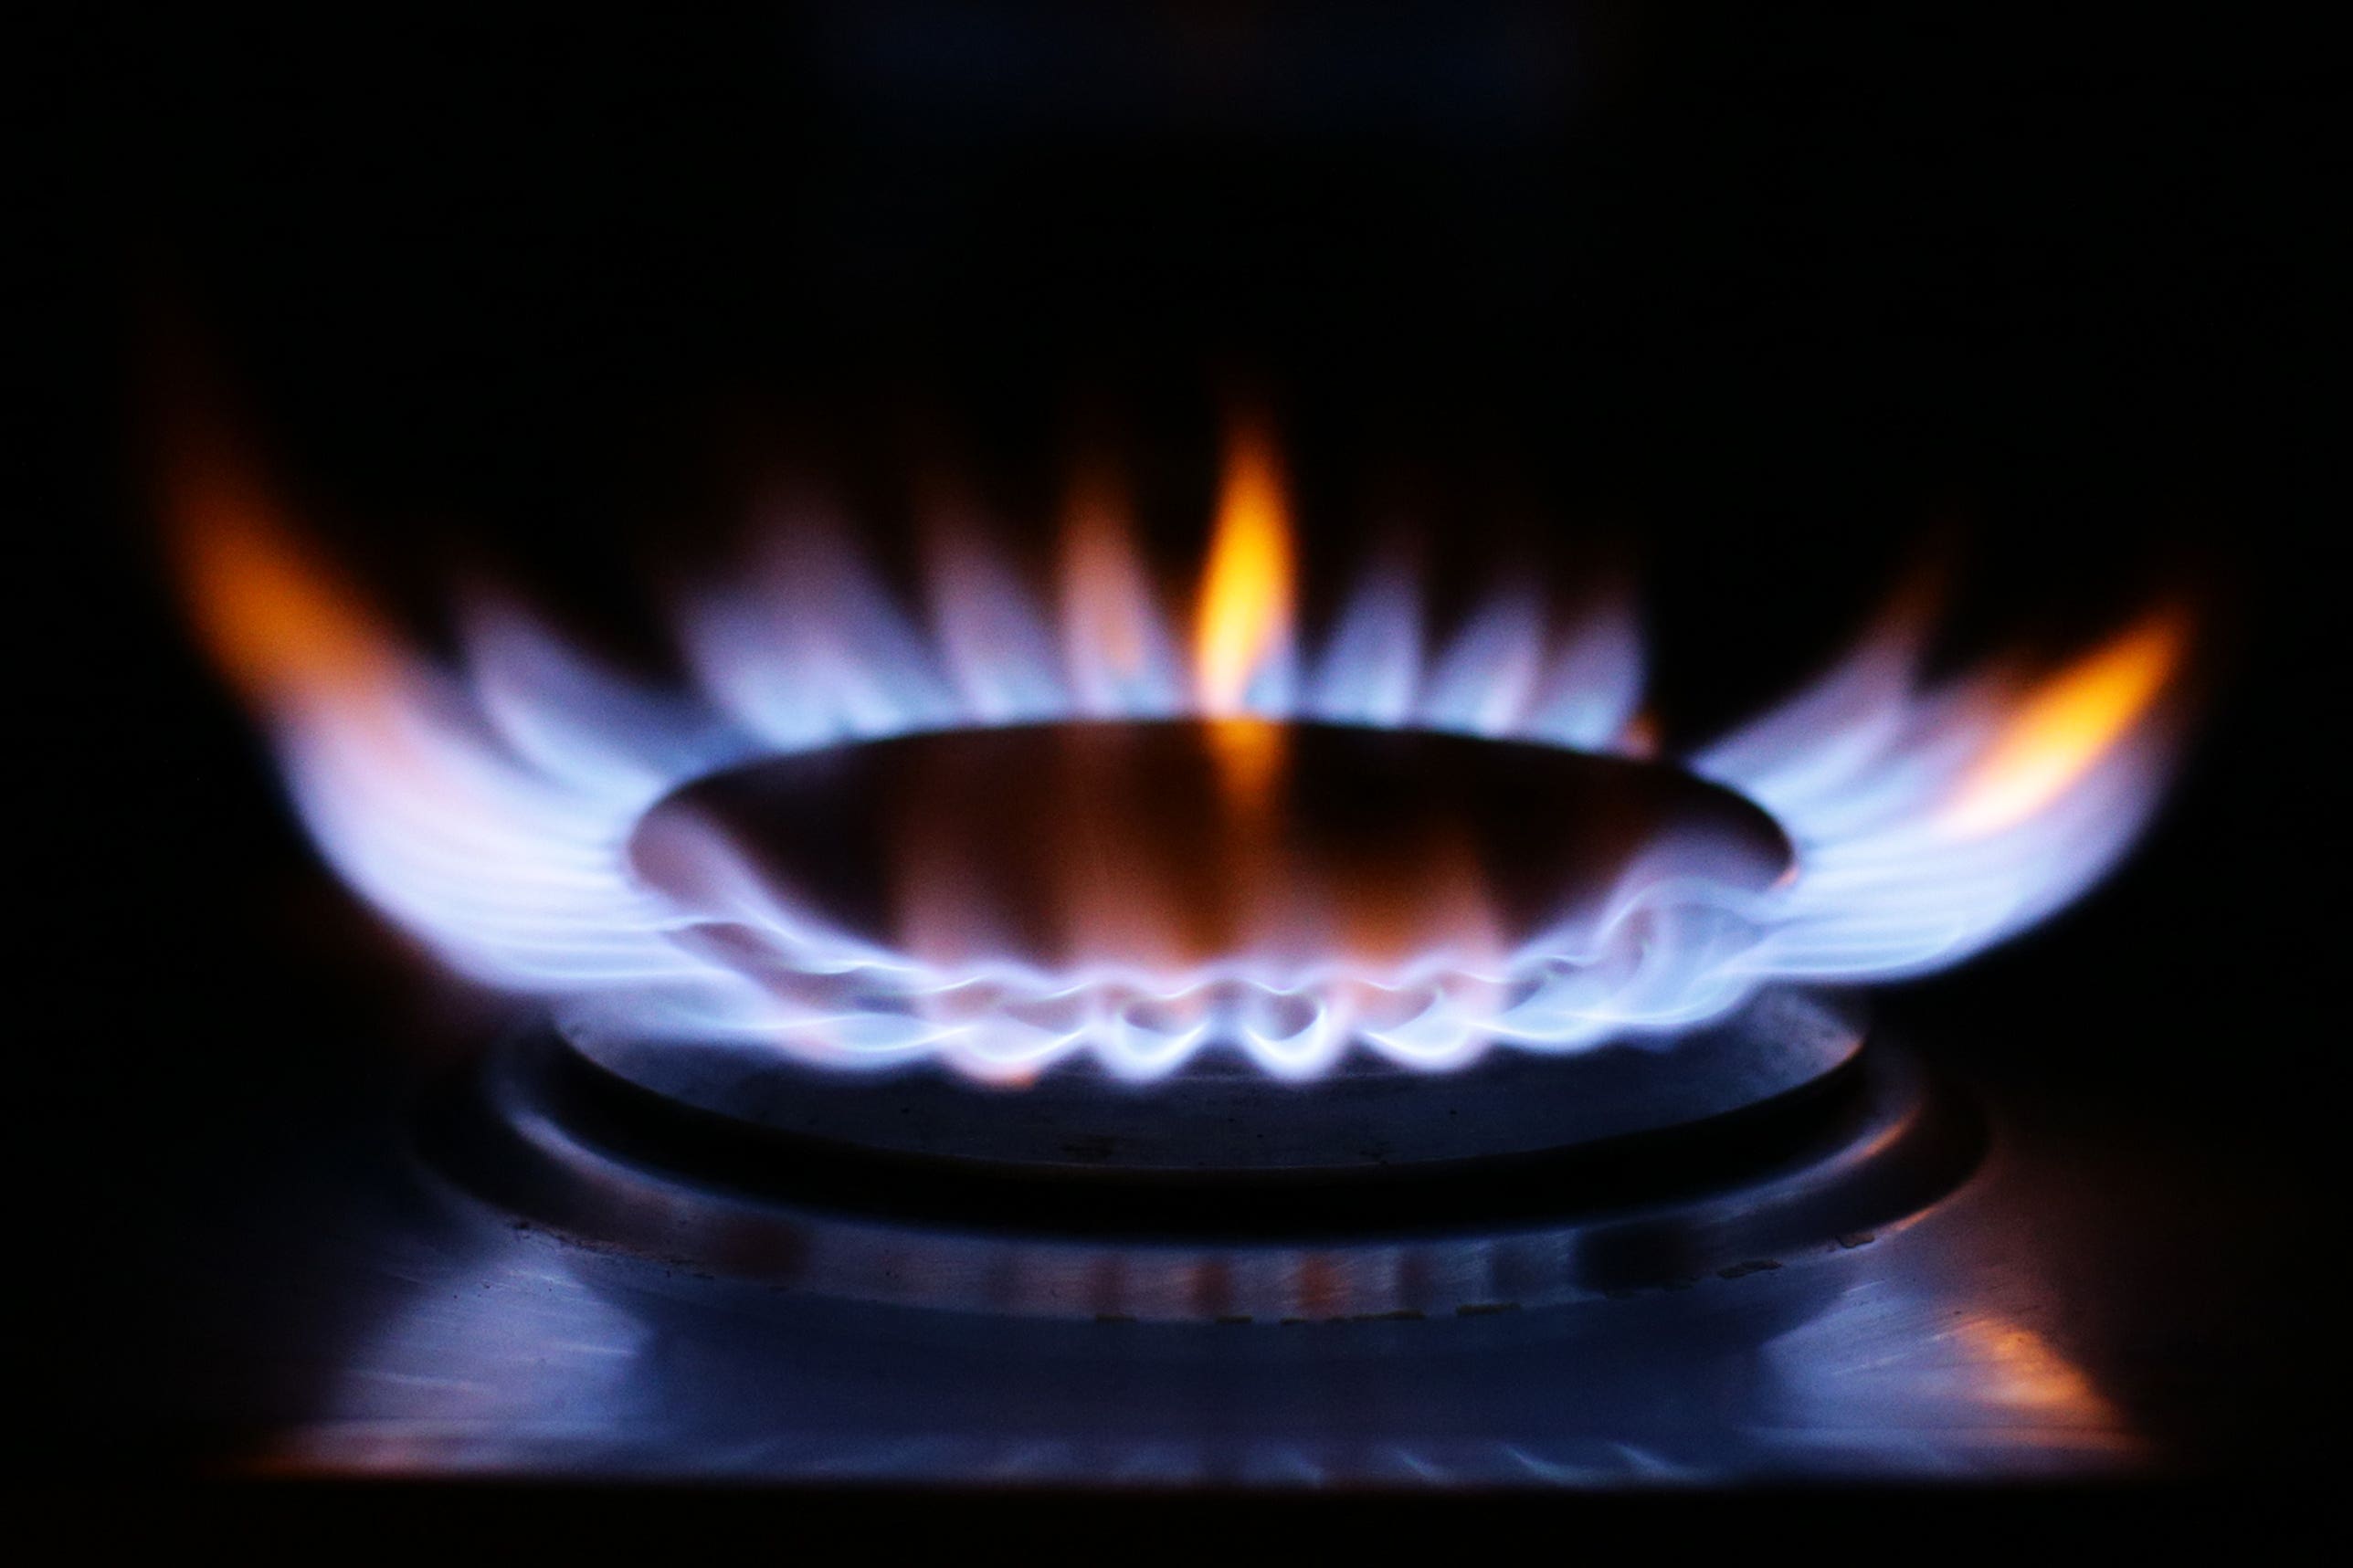 Britons will pay an extra £200 in energy bills to foot the cost of gas power stations